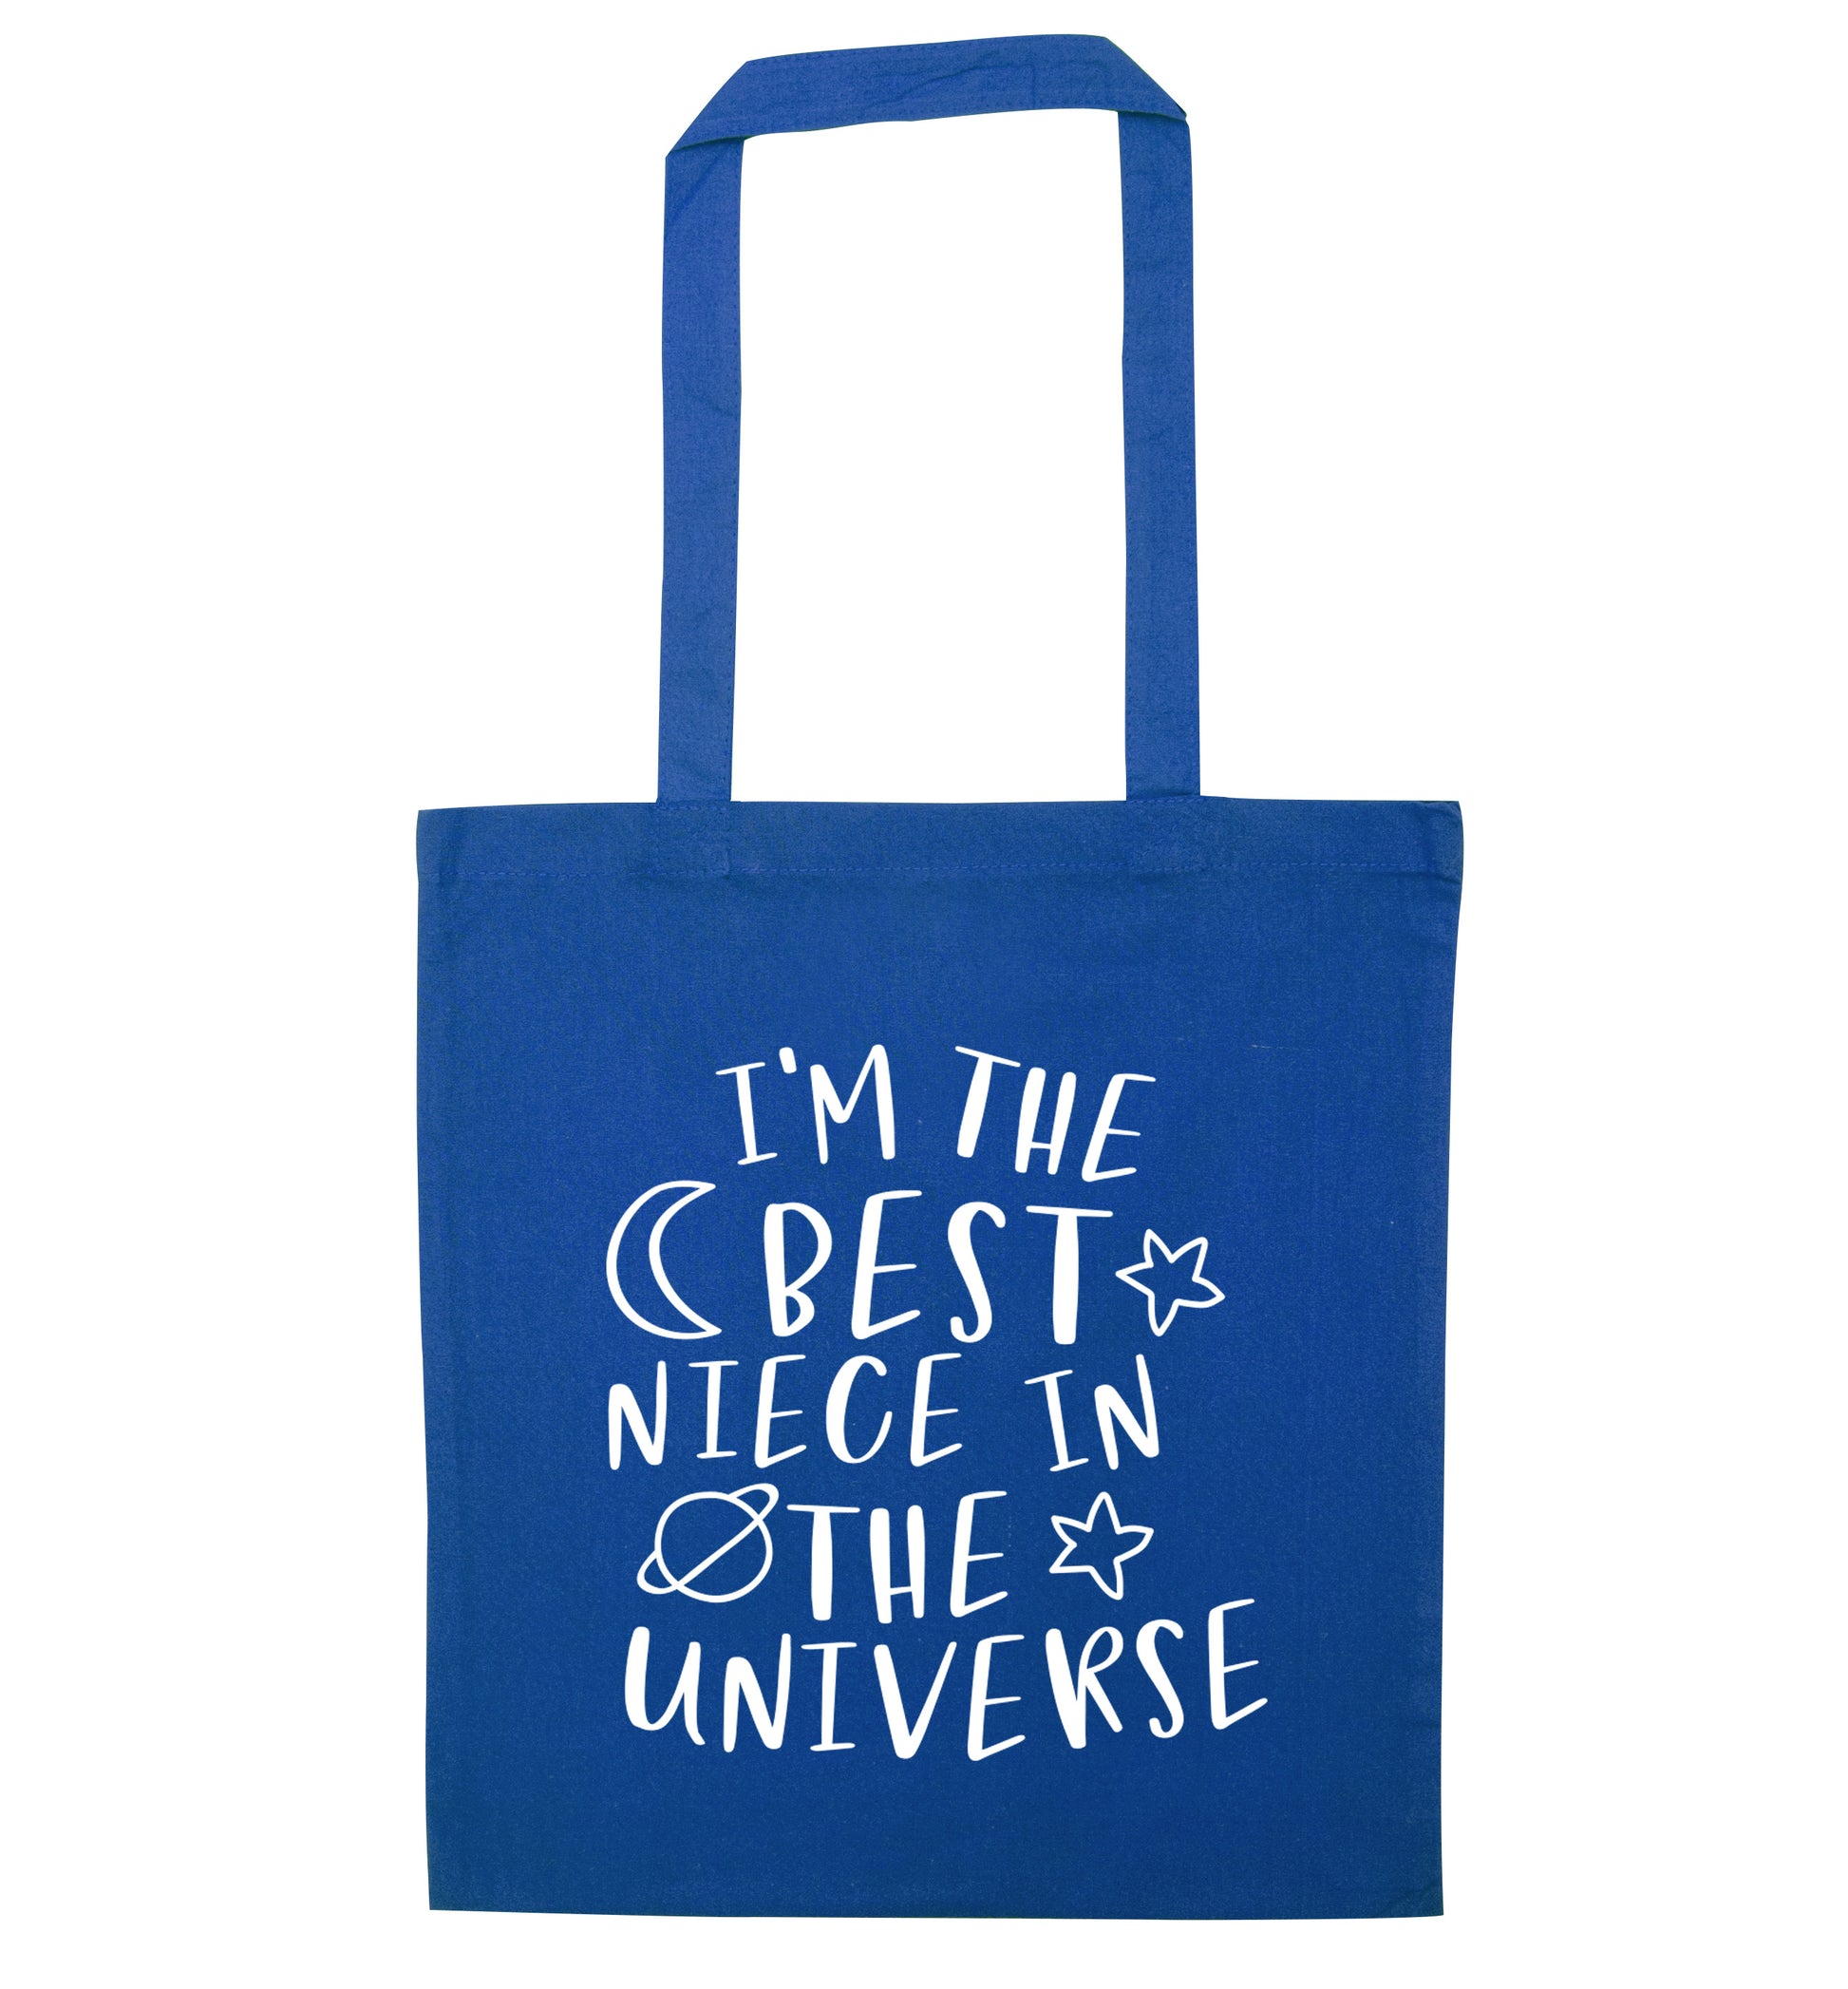 I'm the best niece in the universe blue tote bag